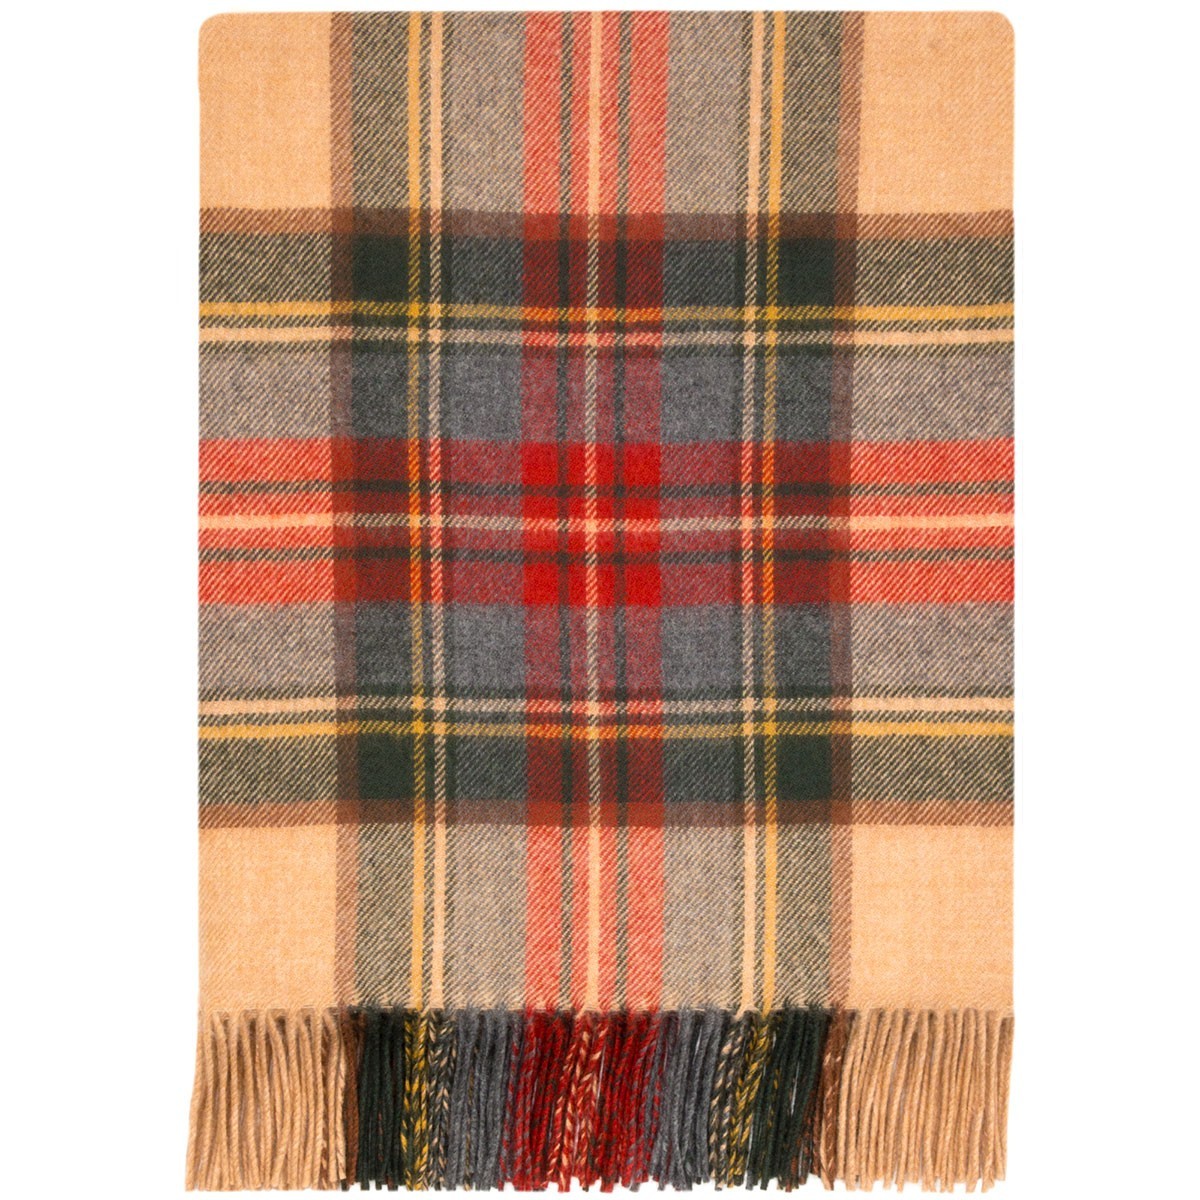 100% Lambswool Blanket in Country Stewart by Lochcarron of Scotland